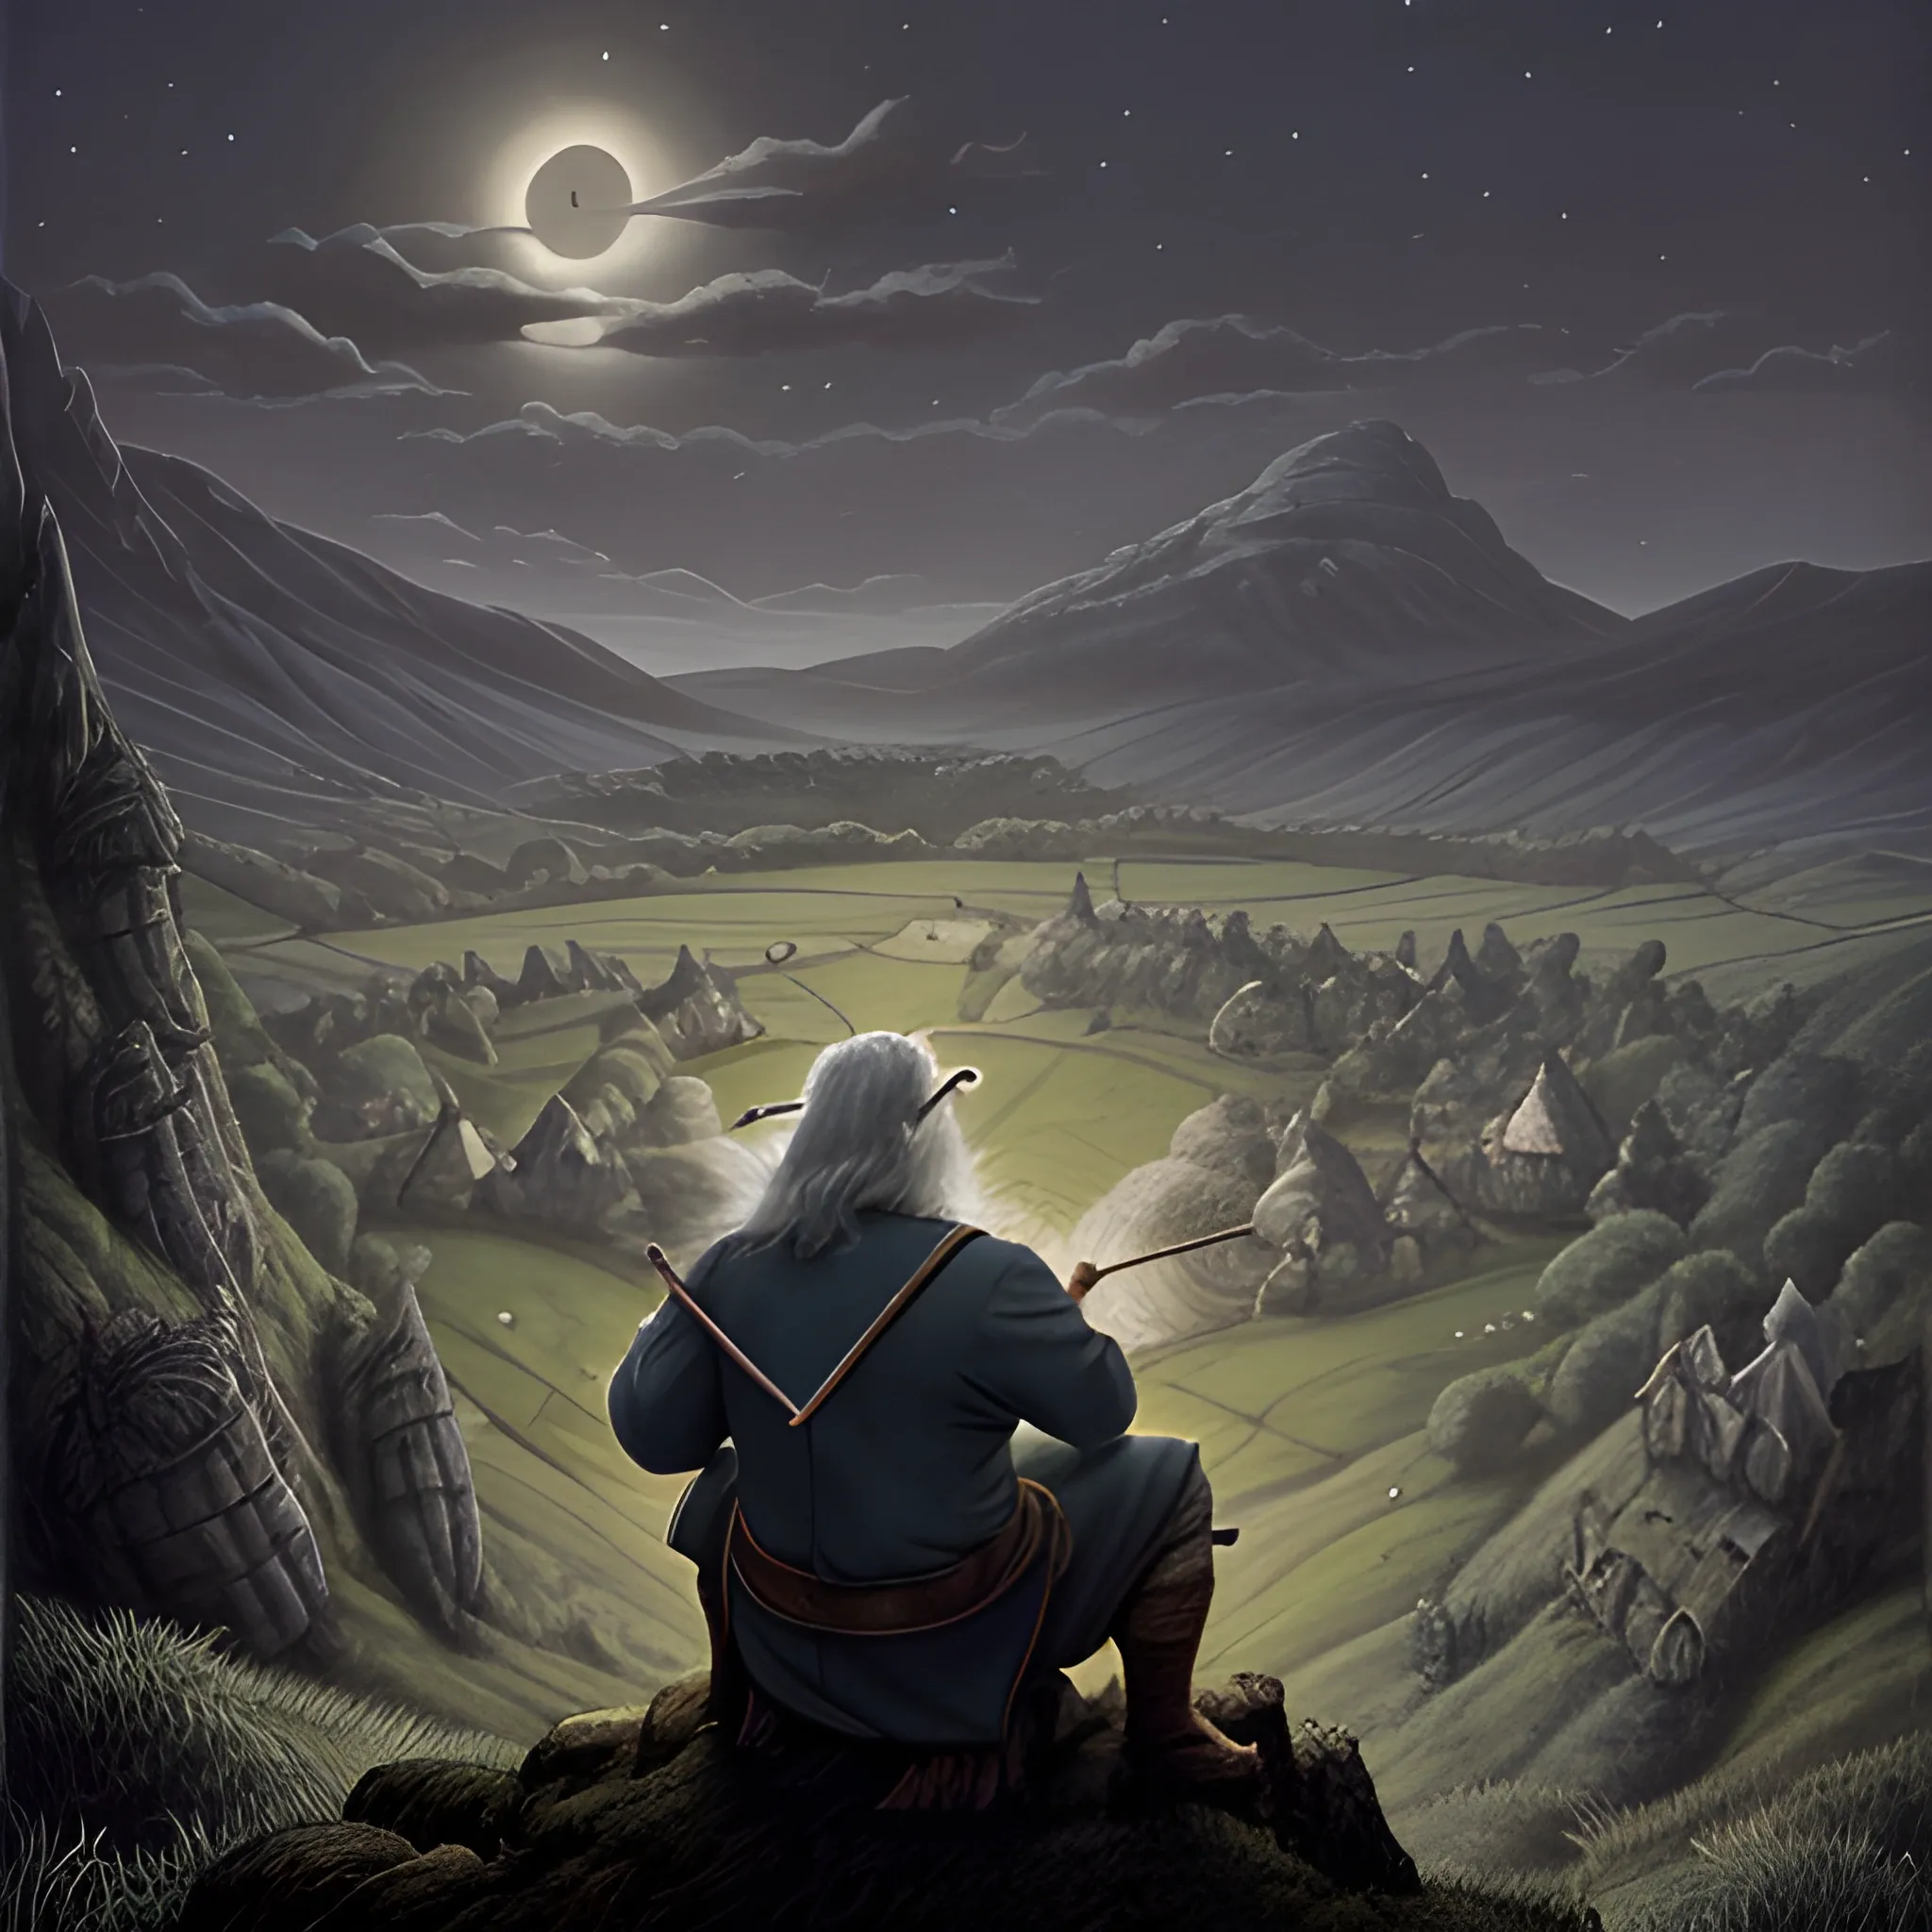 Gandalf looking at the shire from a hill at night. He is smoking a pipe as he looks down on the warmly lit hobbit holes in the distance.